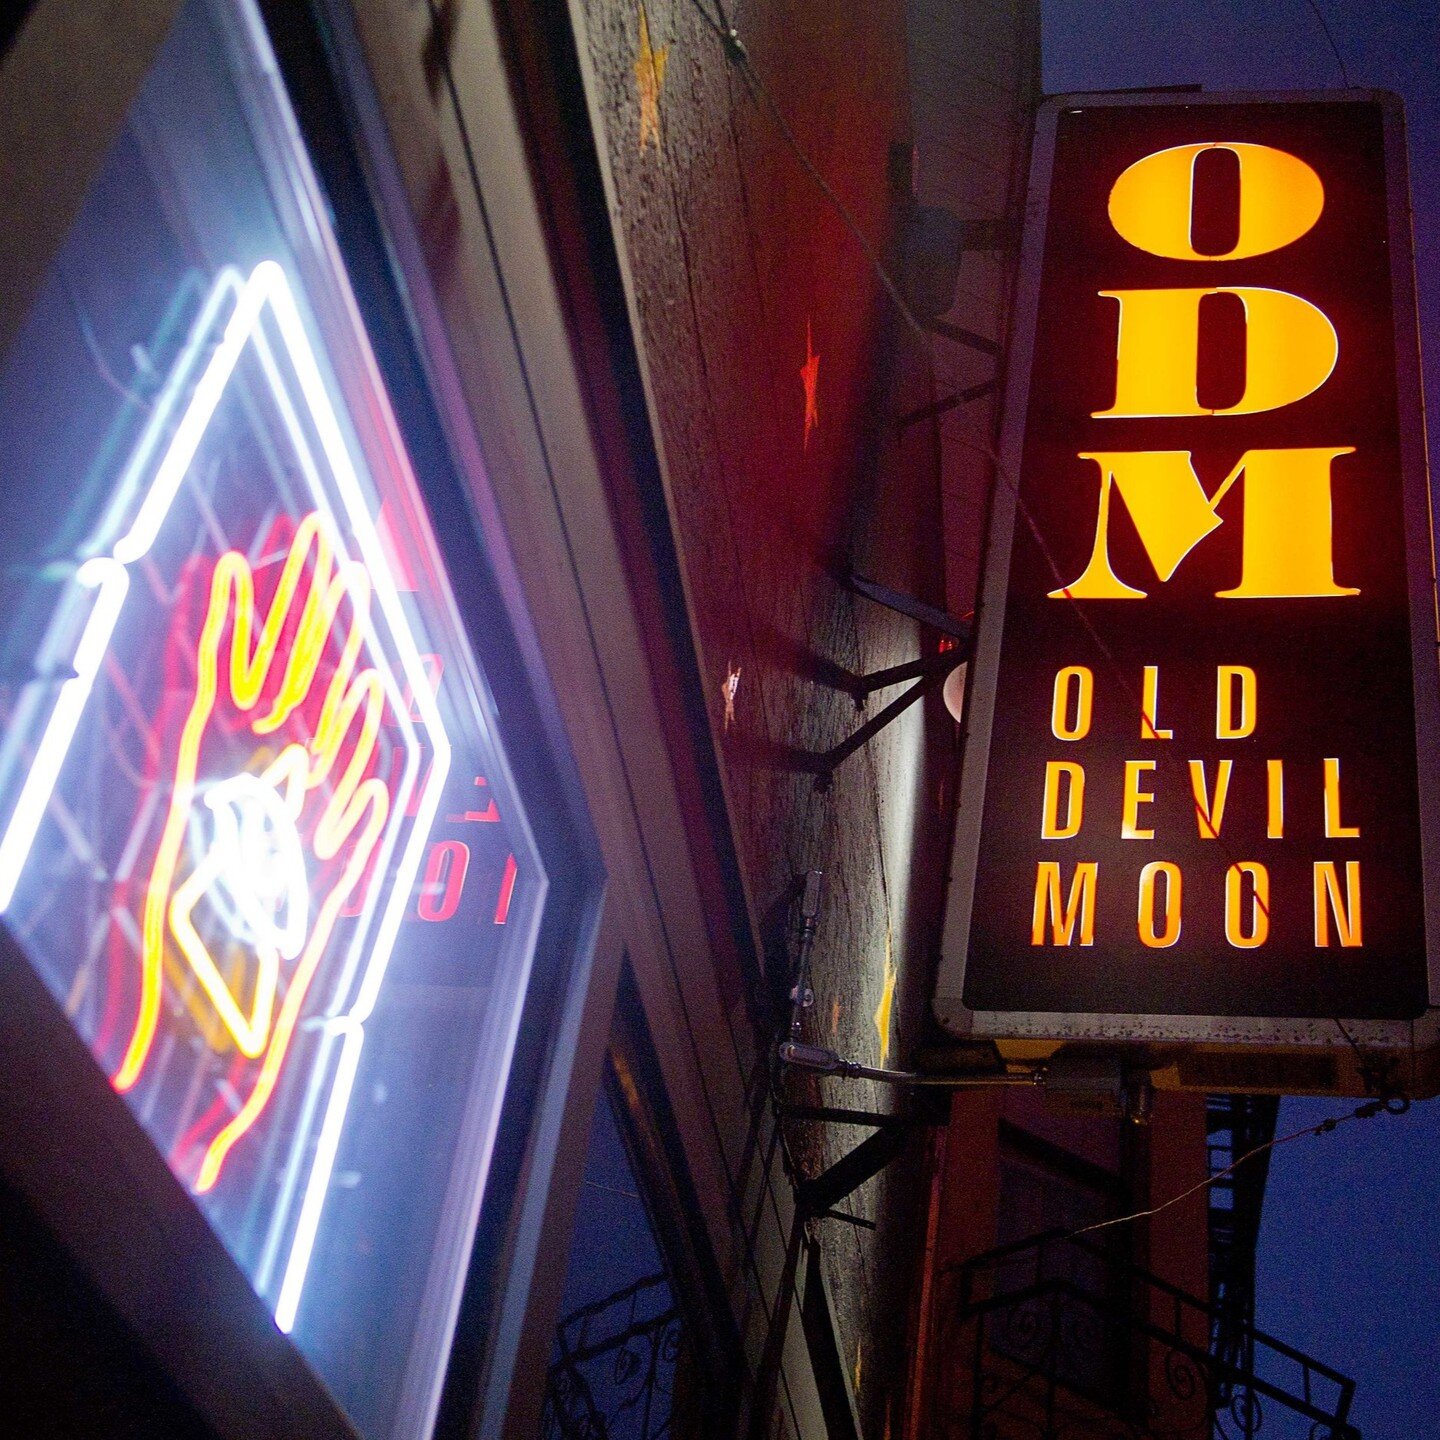 Goodnight Moon. 
Today is the last day to inhabit this space before we say goodbye to @olddevilmoonsf. 

Come on by to raise a final glass with me.